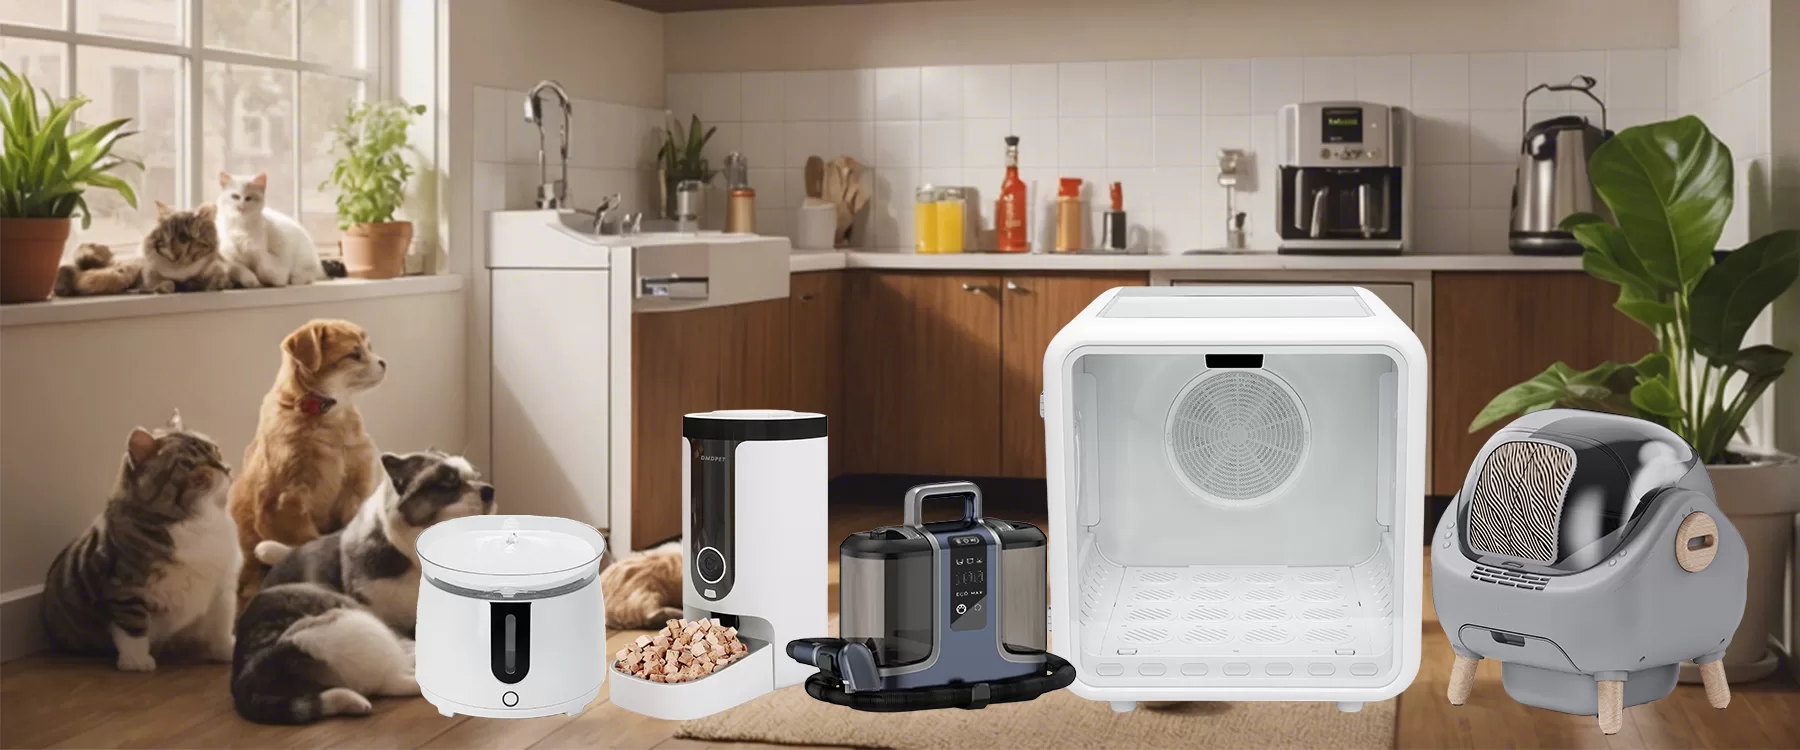 Pet Appliances for cat and dog